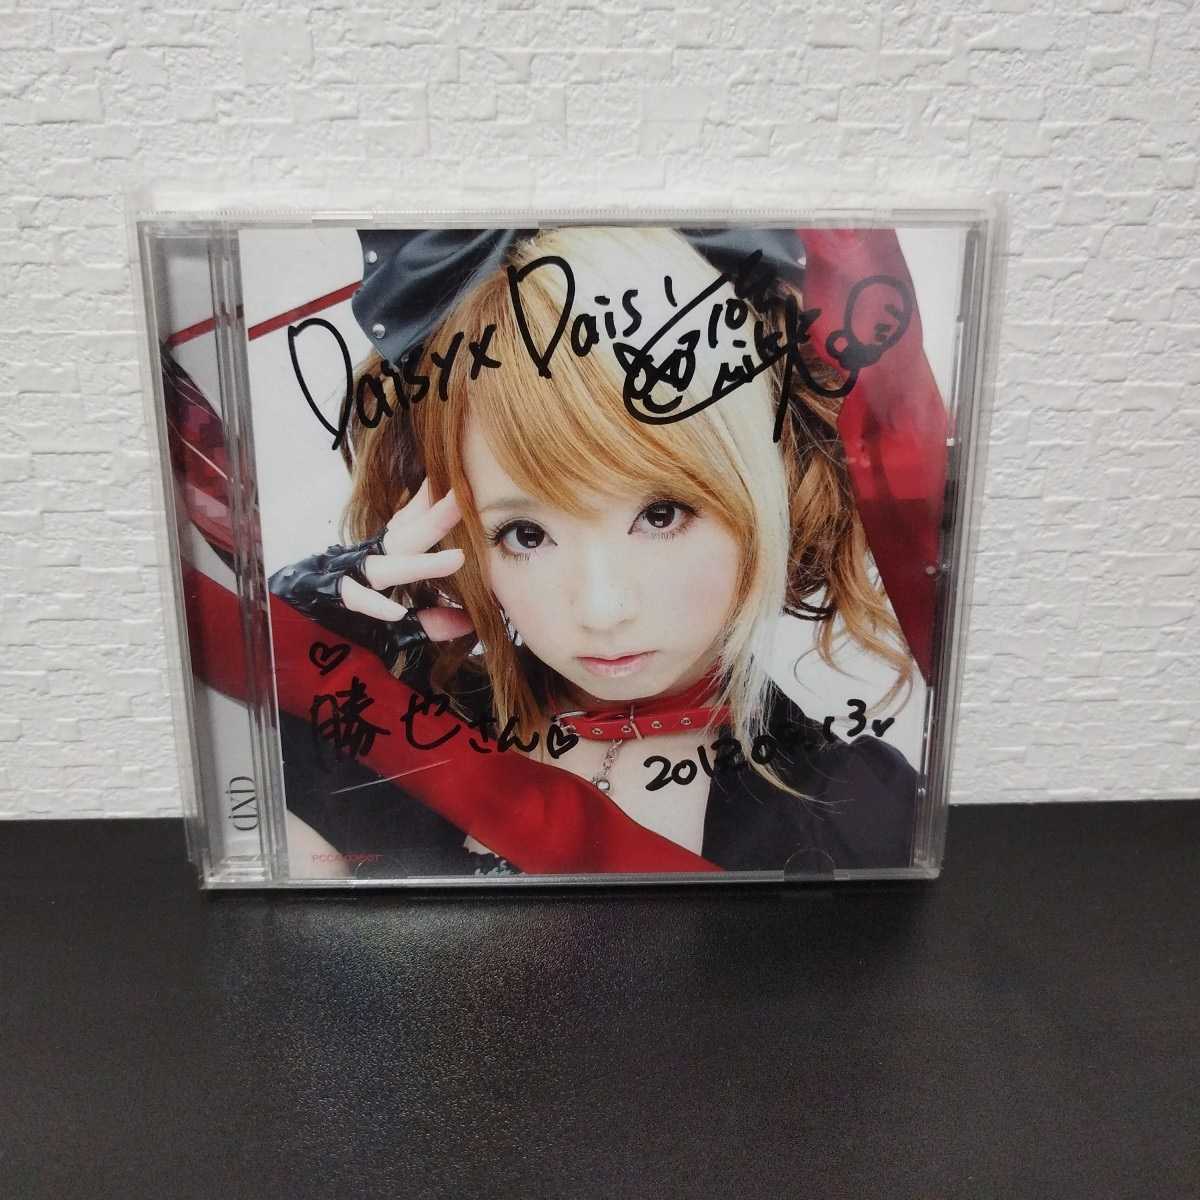  secondhand goods *Daisy×Daisy DXD * autographed 